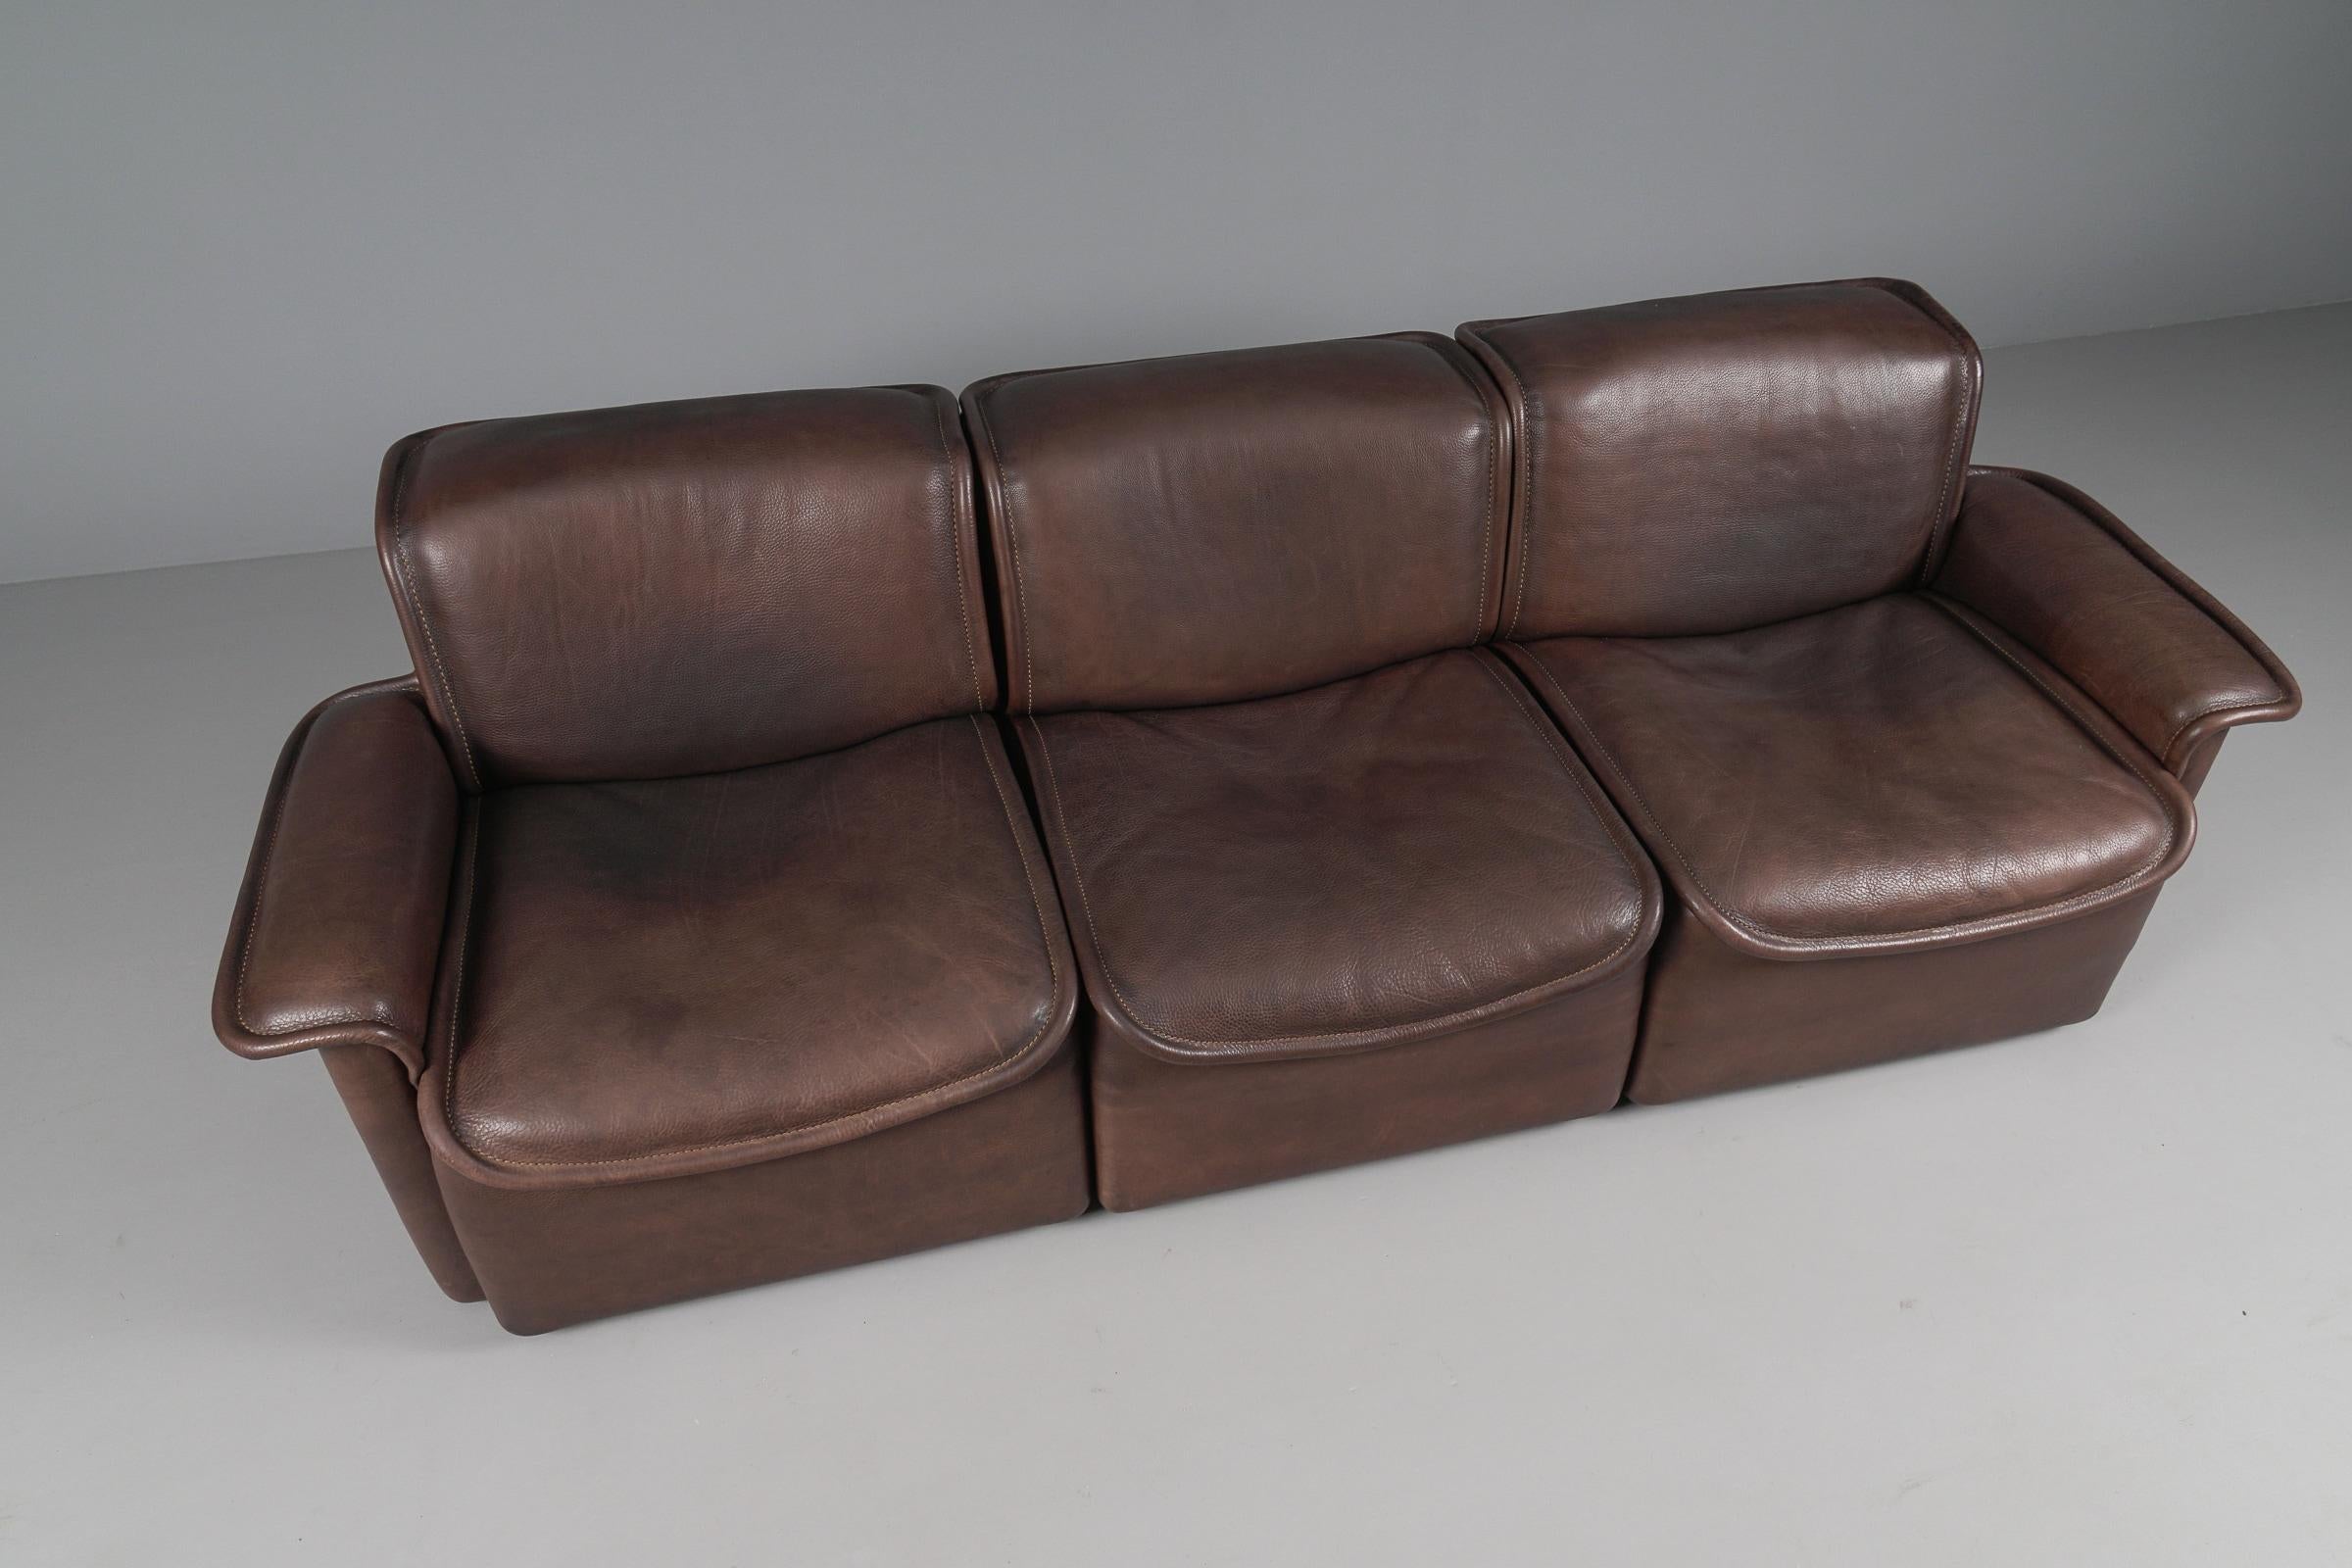 Three Seater Sofa by De Sede DS-12 in Brown Neck Leather, 1960s, Switzerland For Sale 3